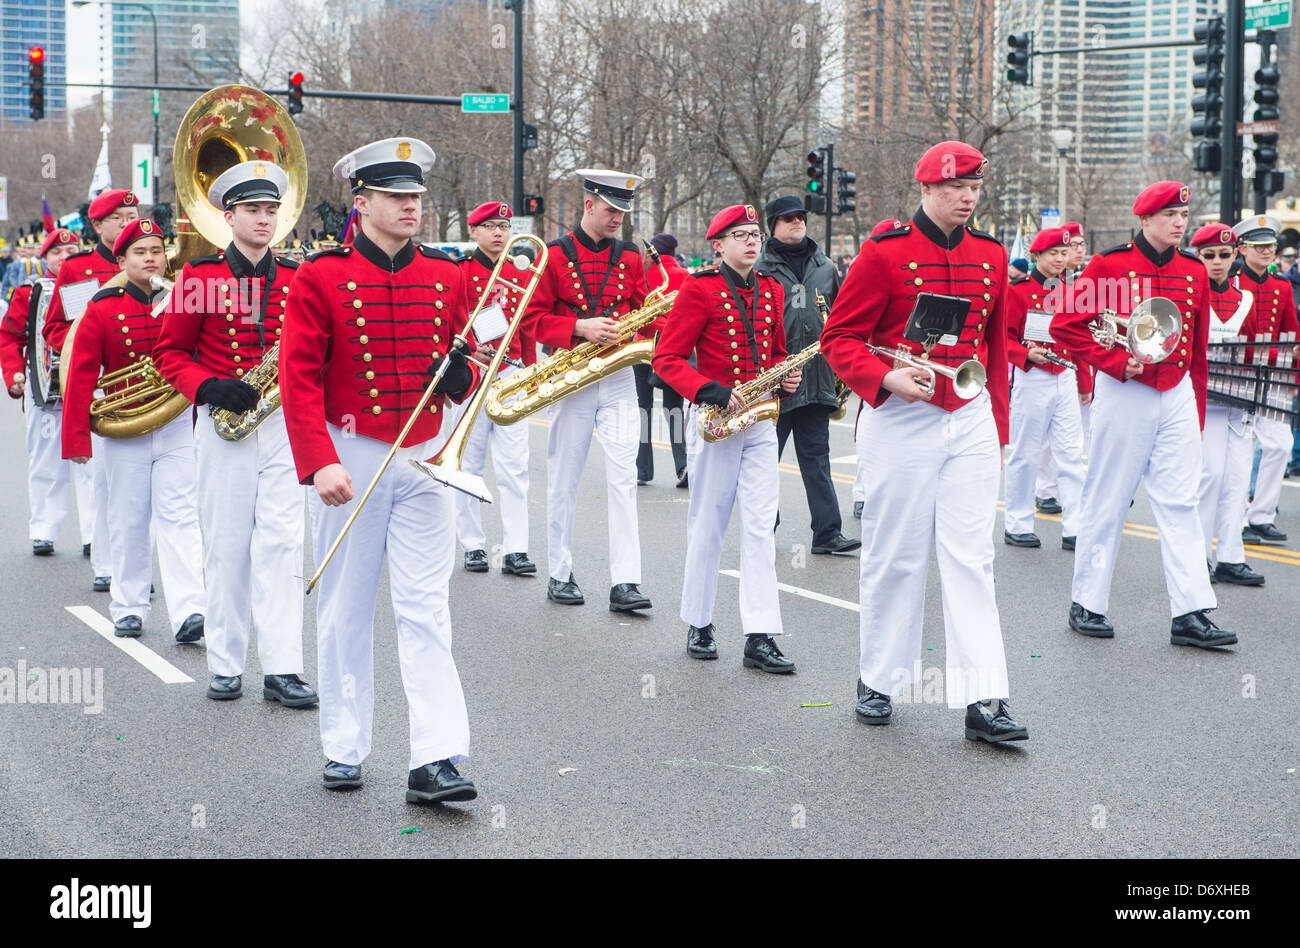 Band marching at the annual Saint Patrick's Day Parade in Chicago Stock Photo